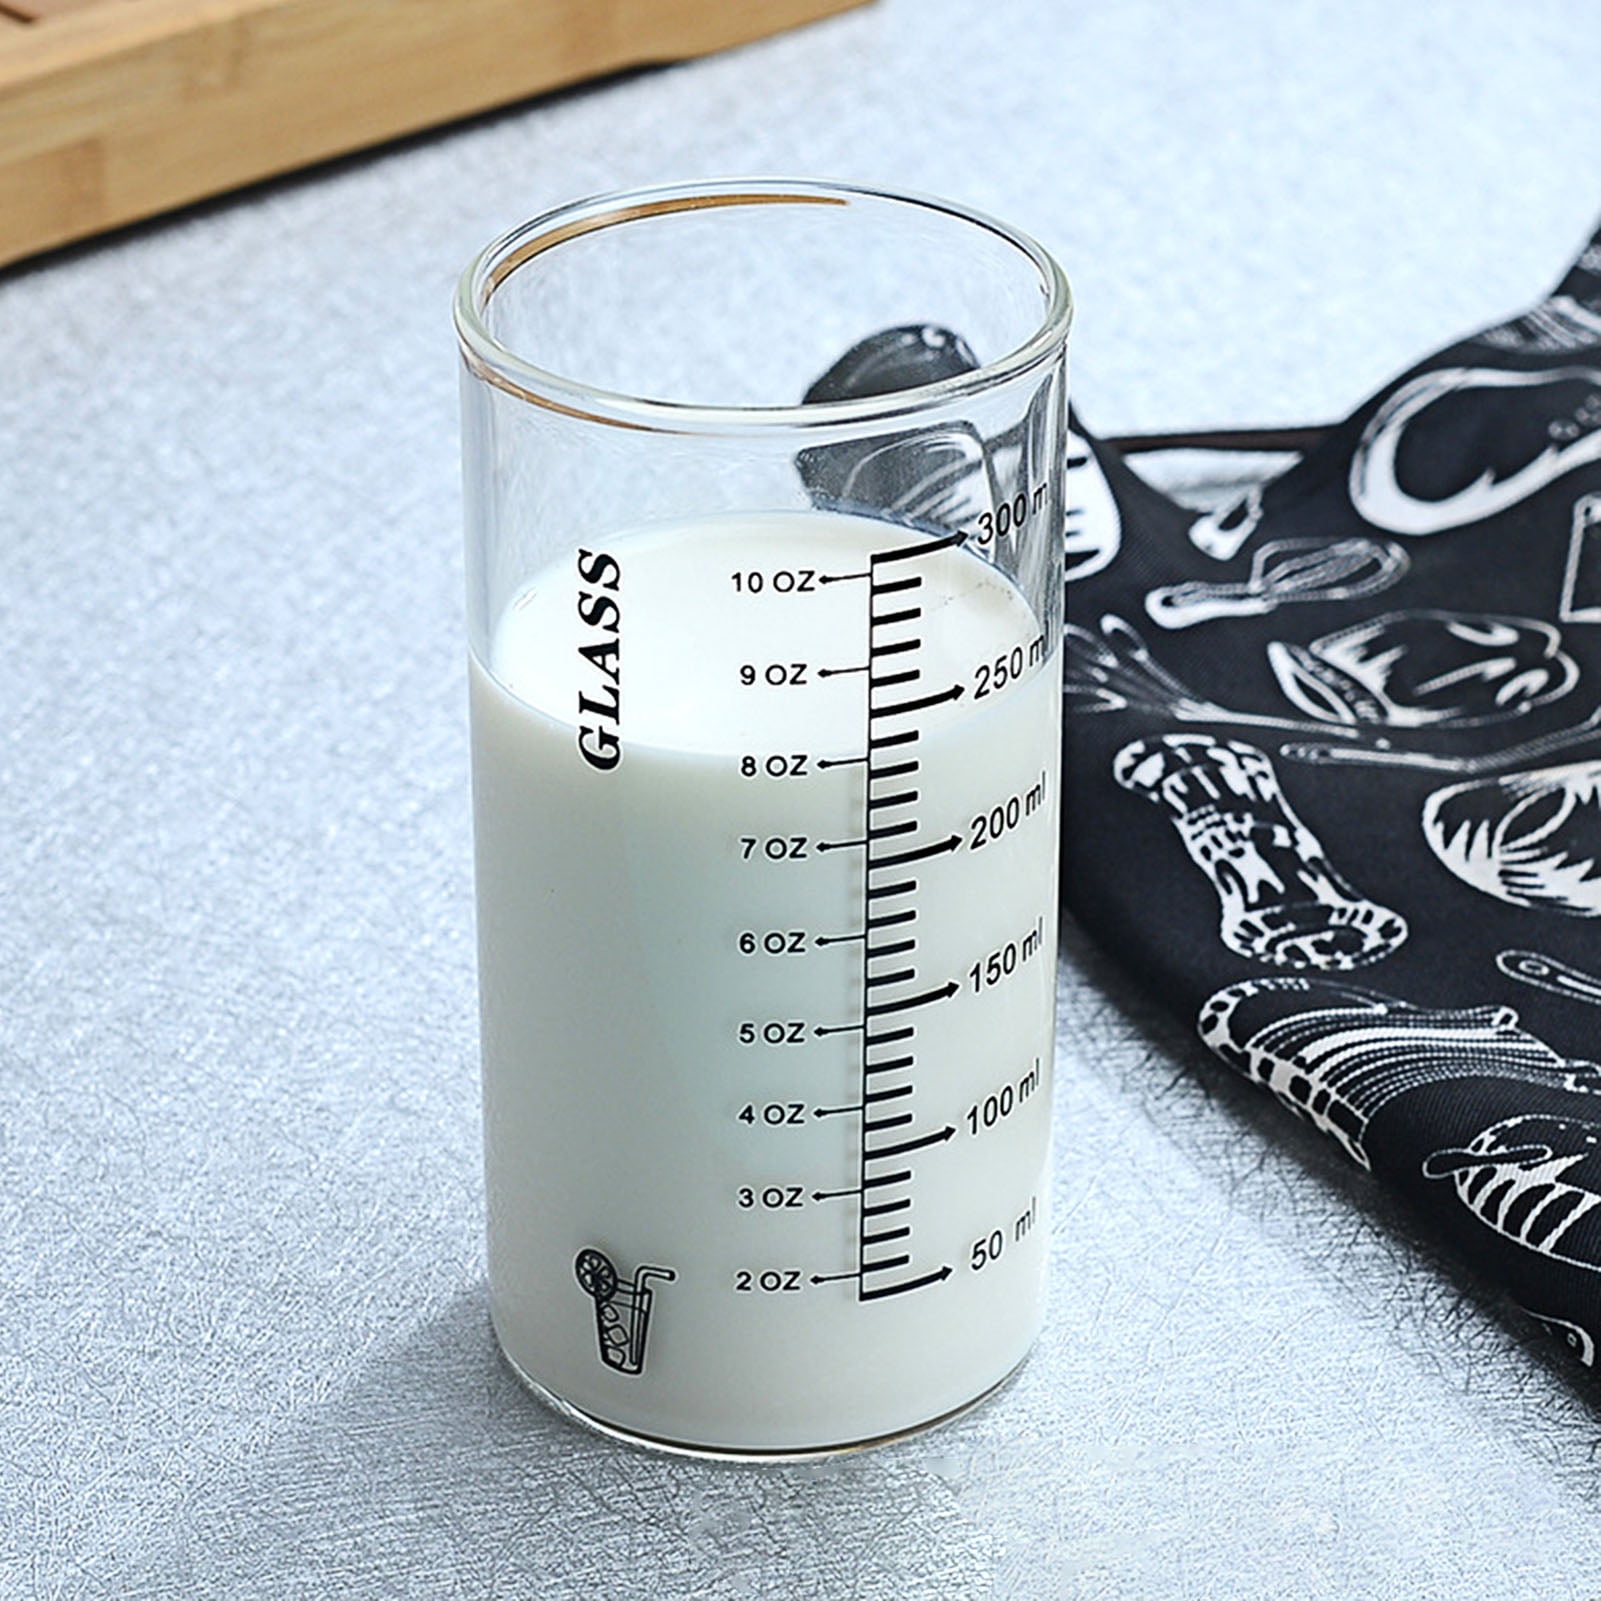 CHEERS Shot Measuring Glass w/ Ounce & Liter Measuring Measurement